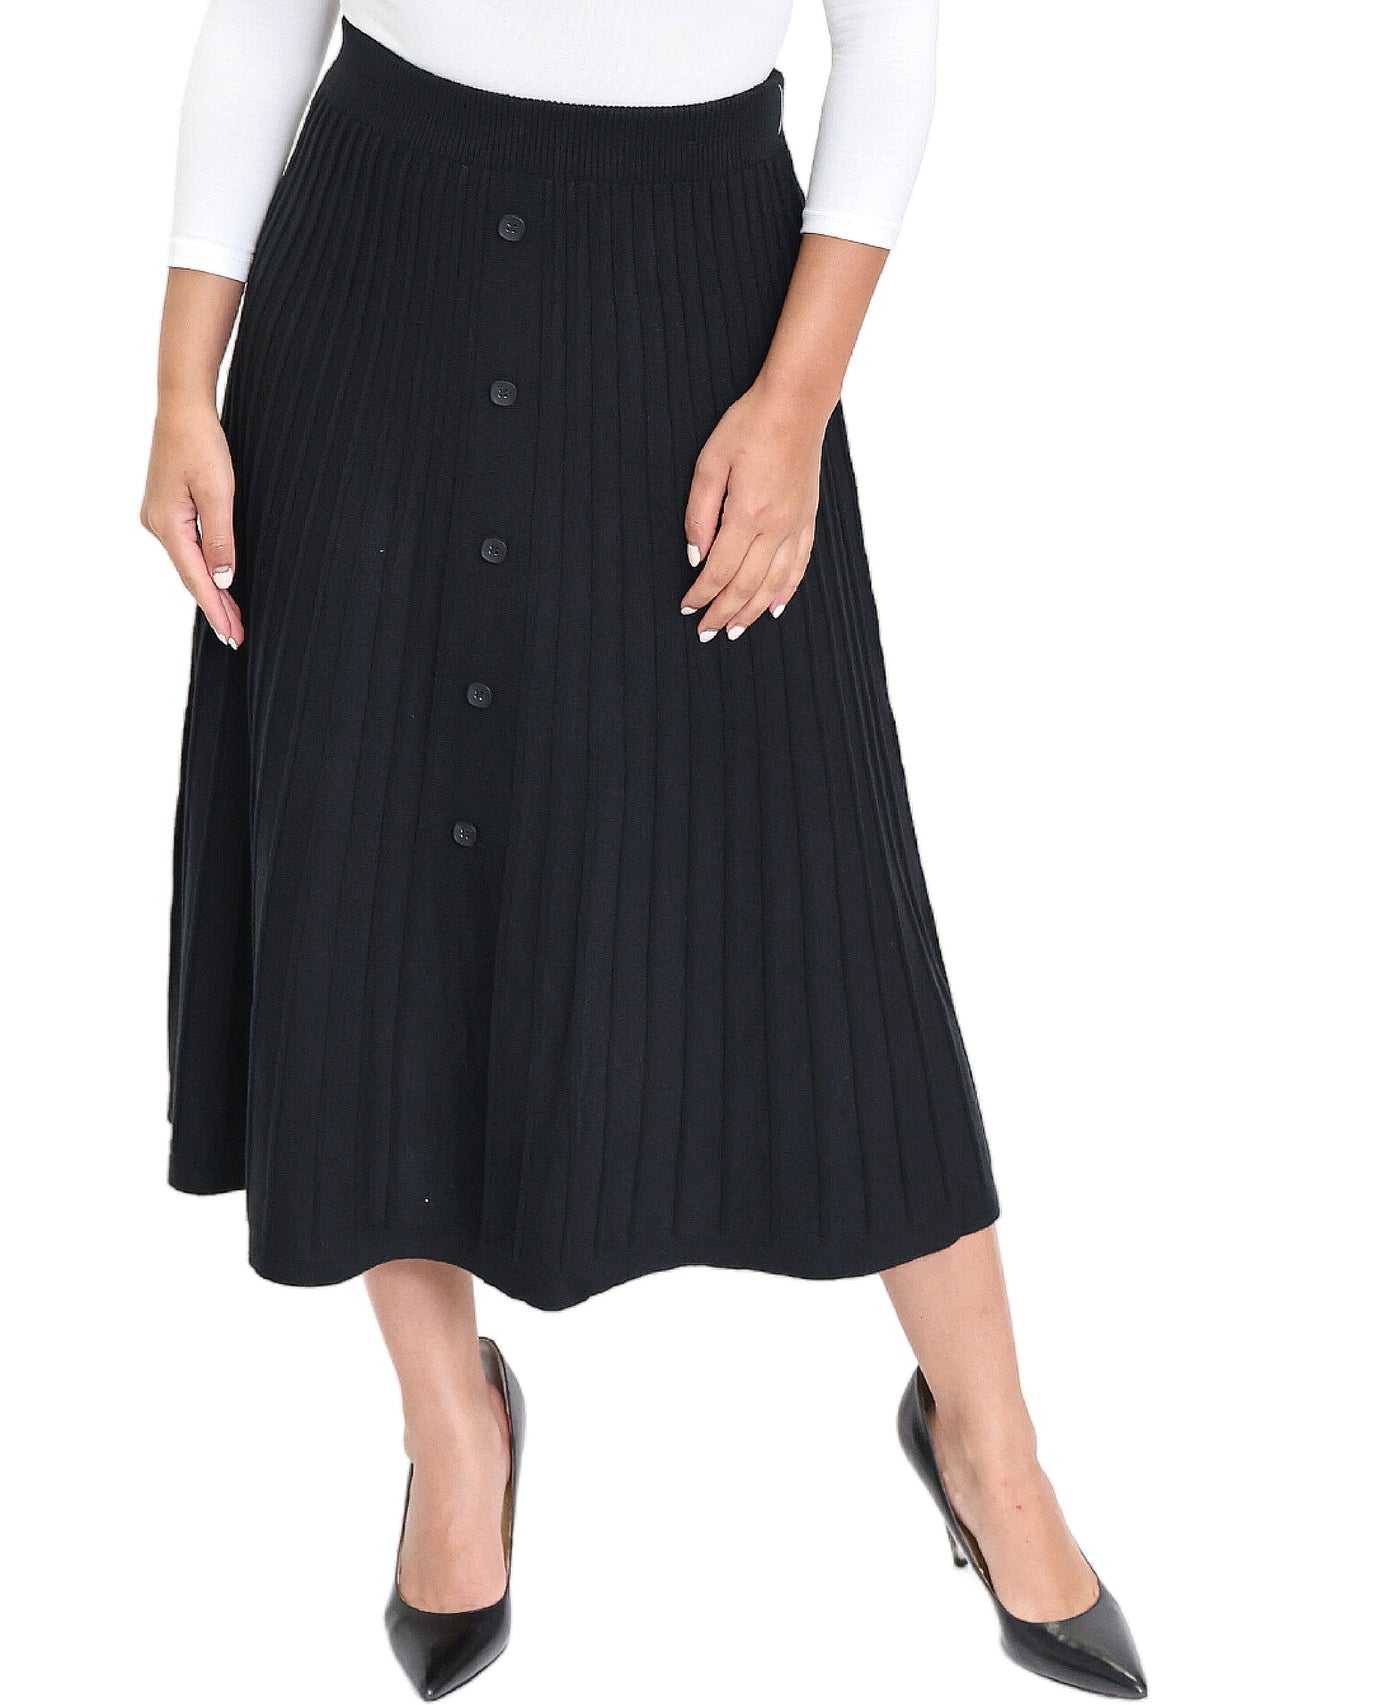 Midi Knit Skirt w/ Buttons image 1